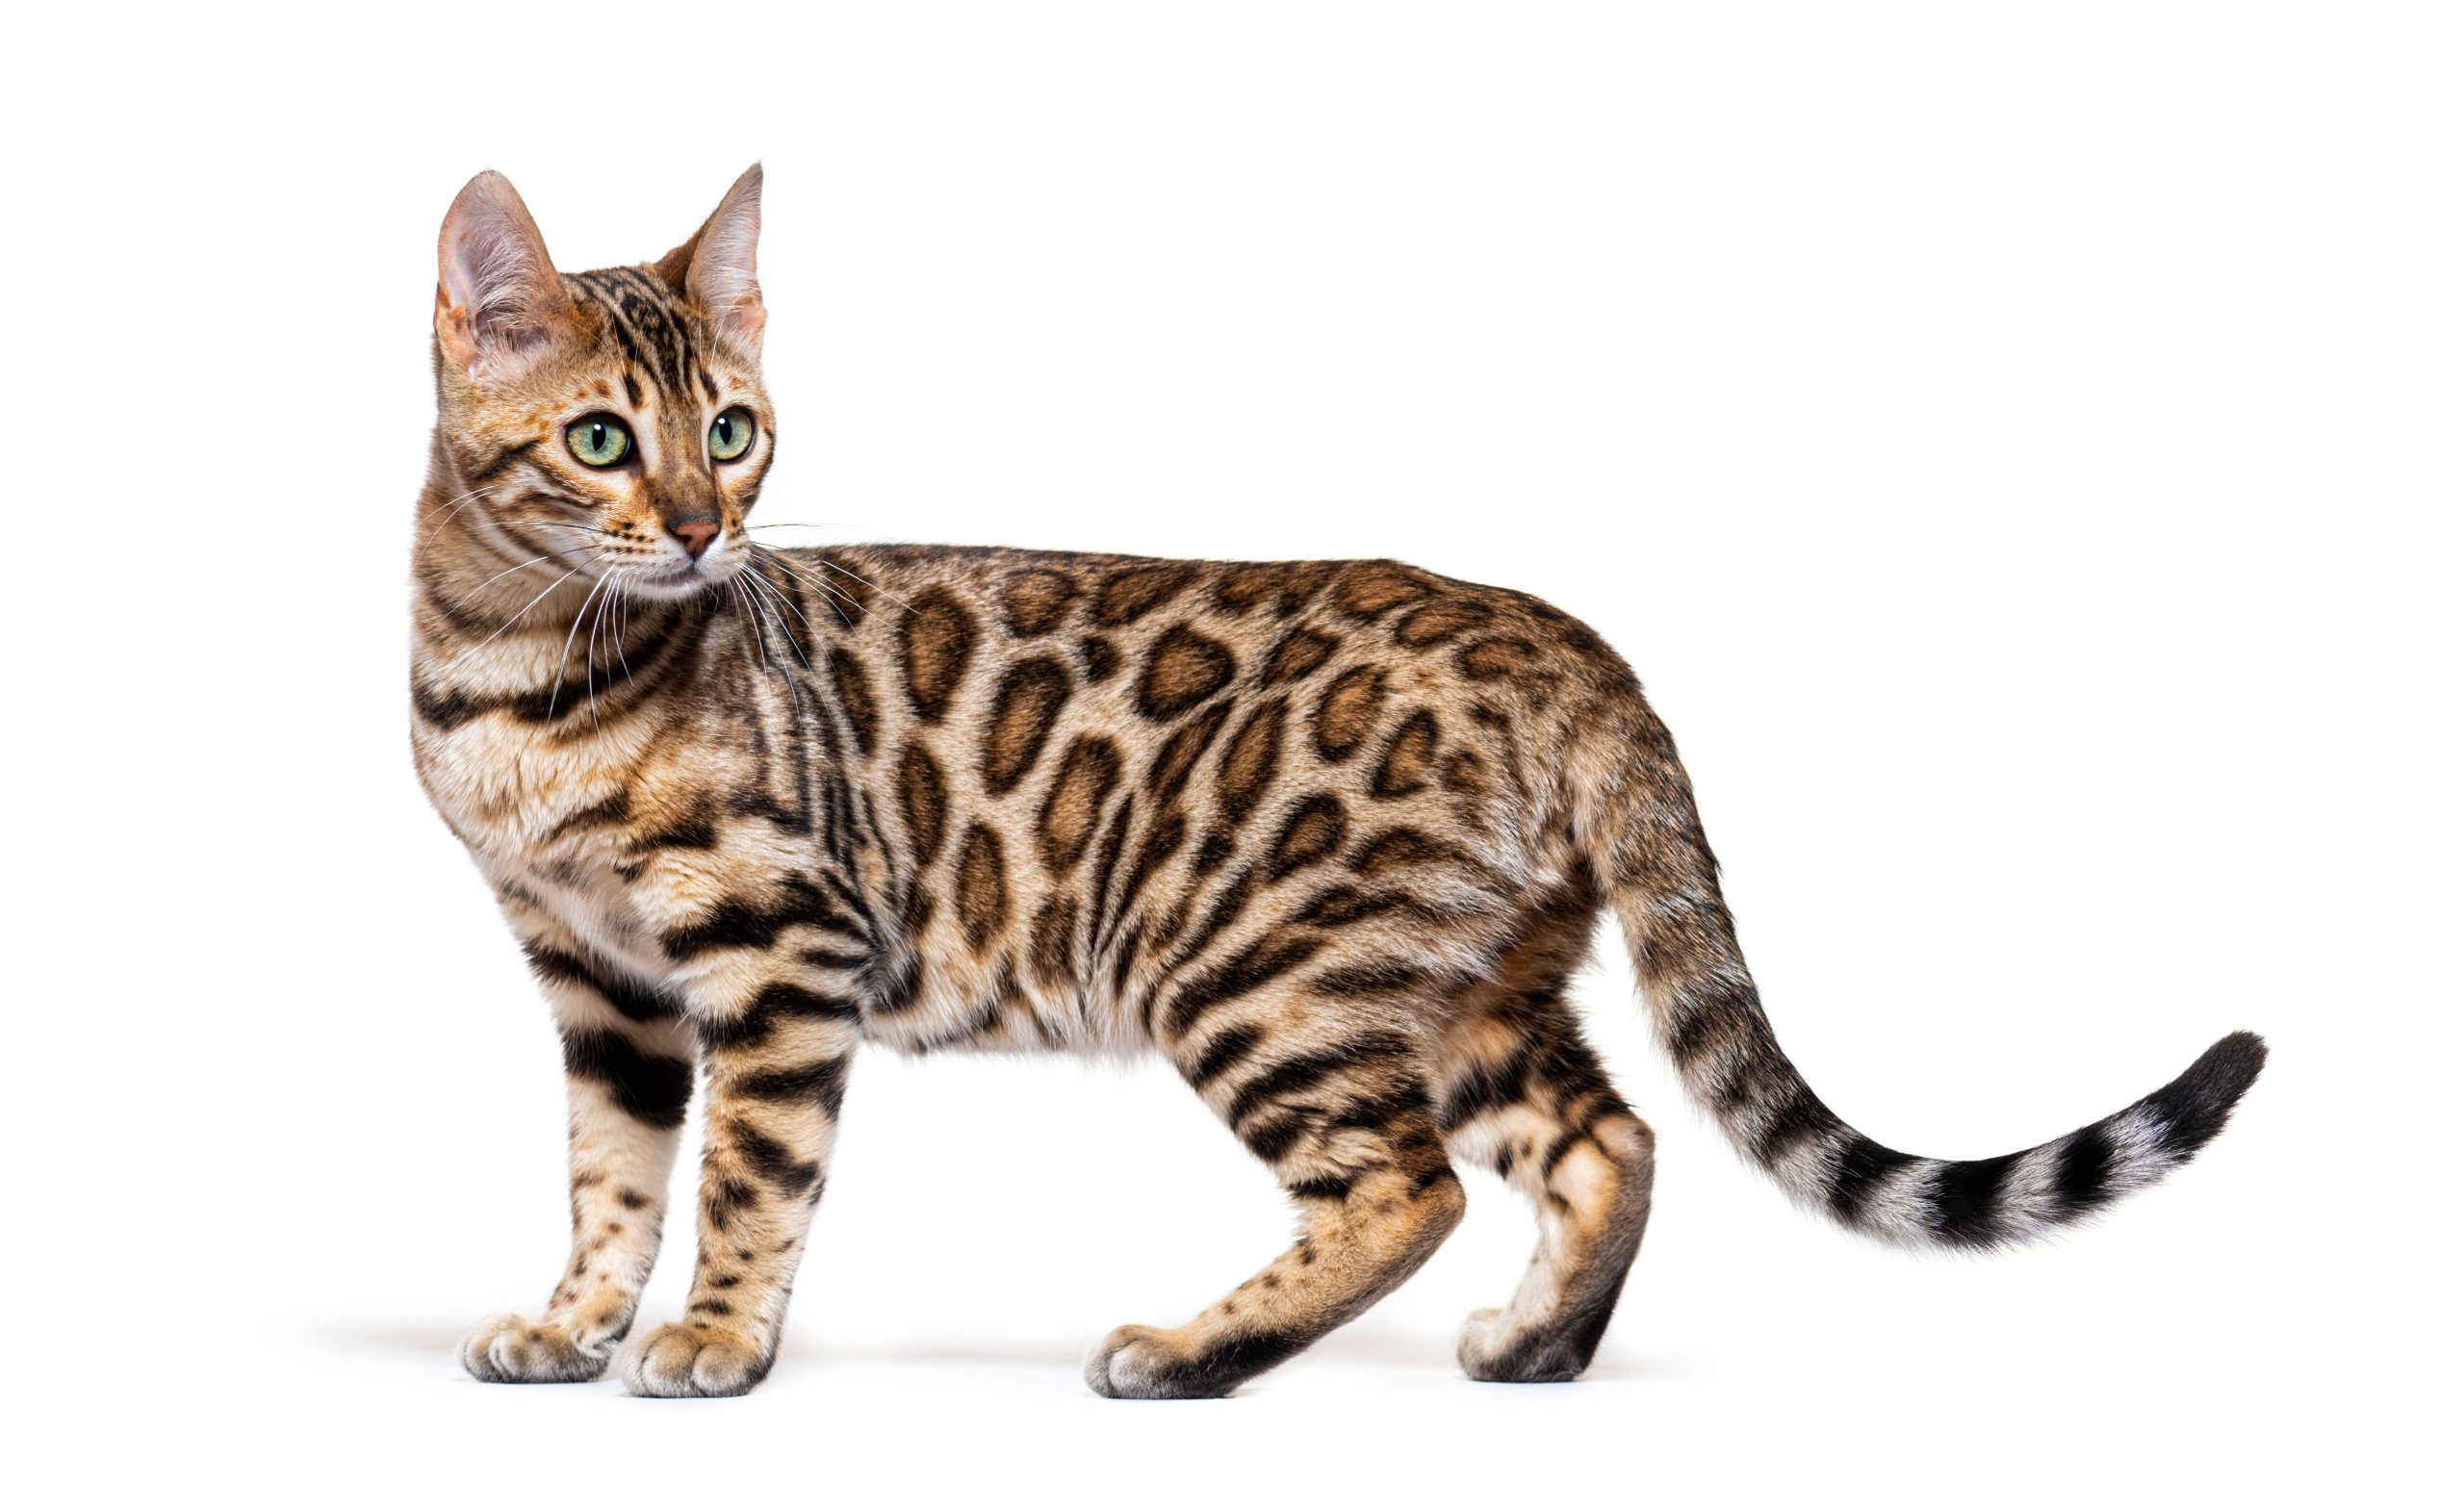 standing bengal cat, side view, isolated on white